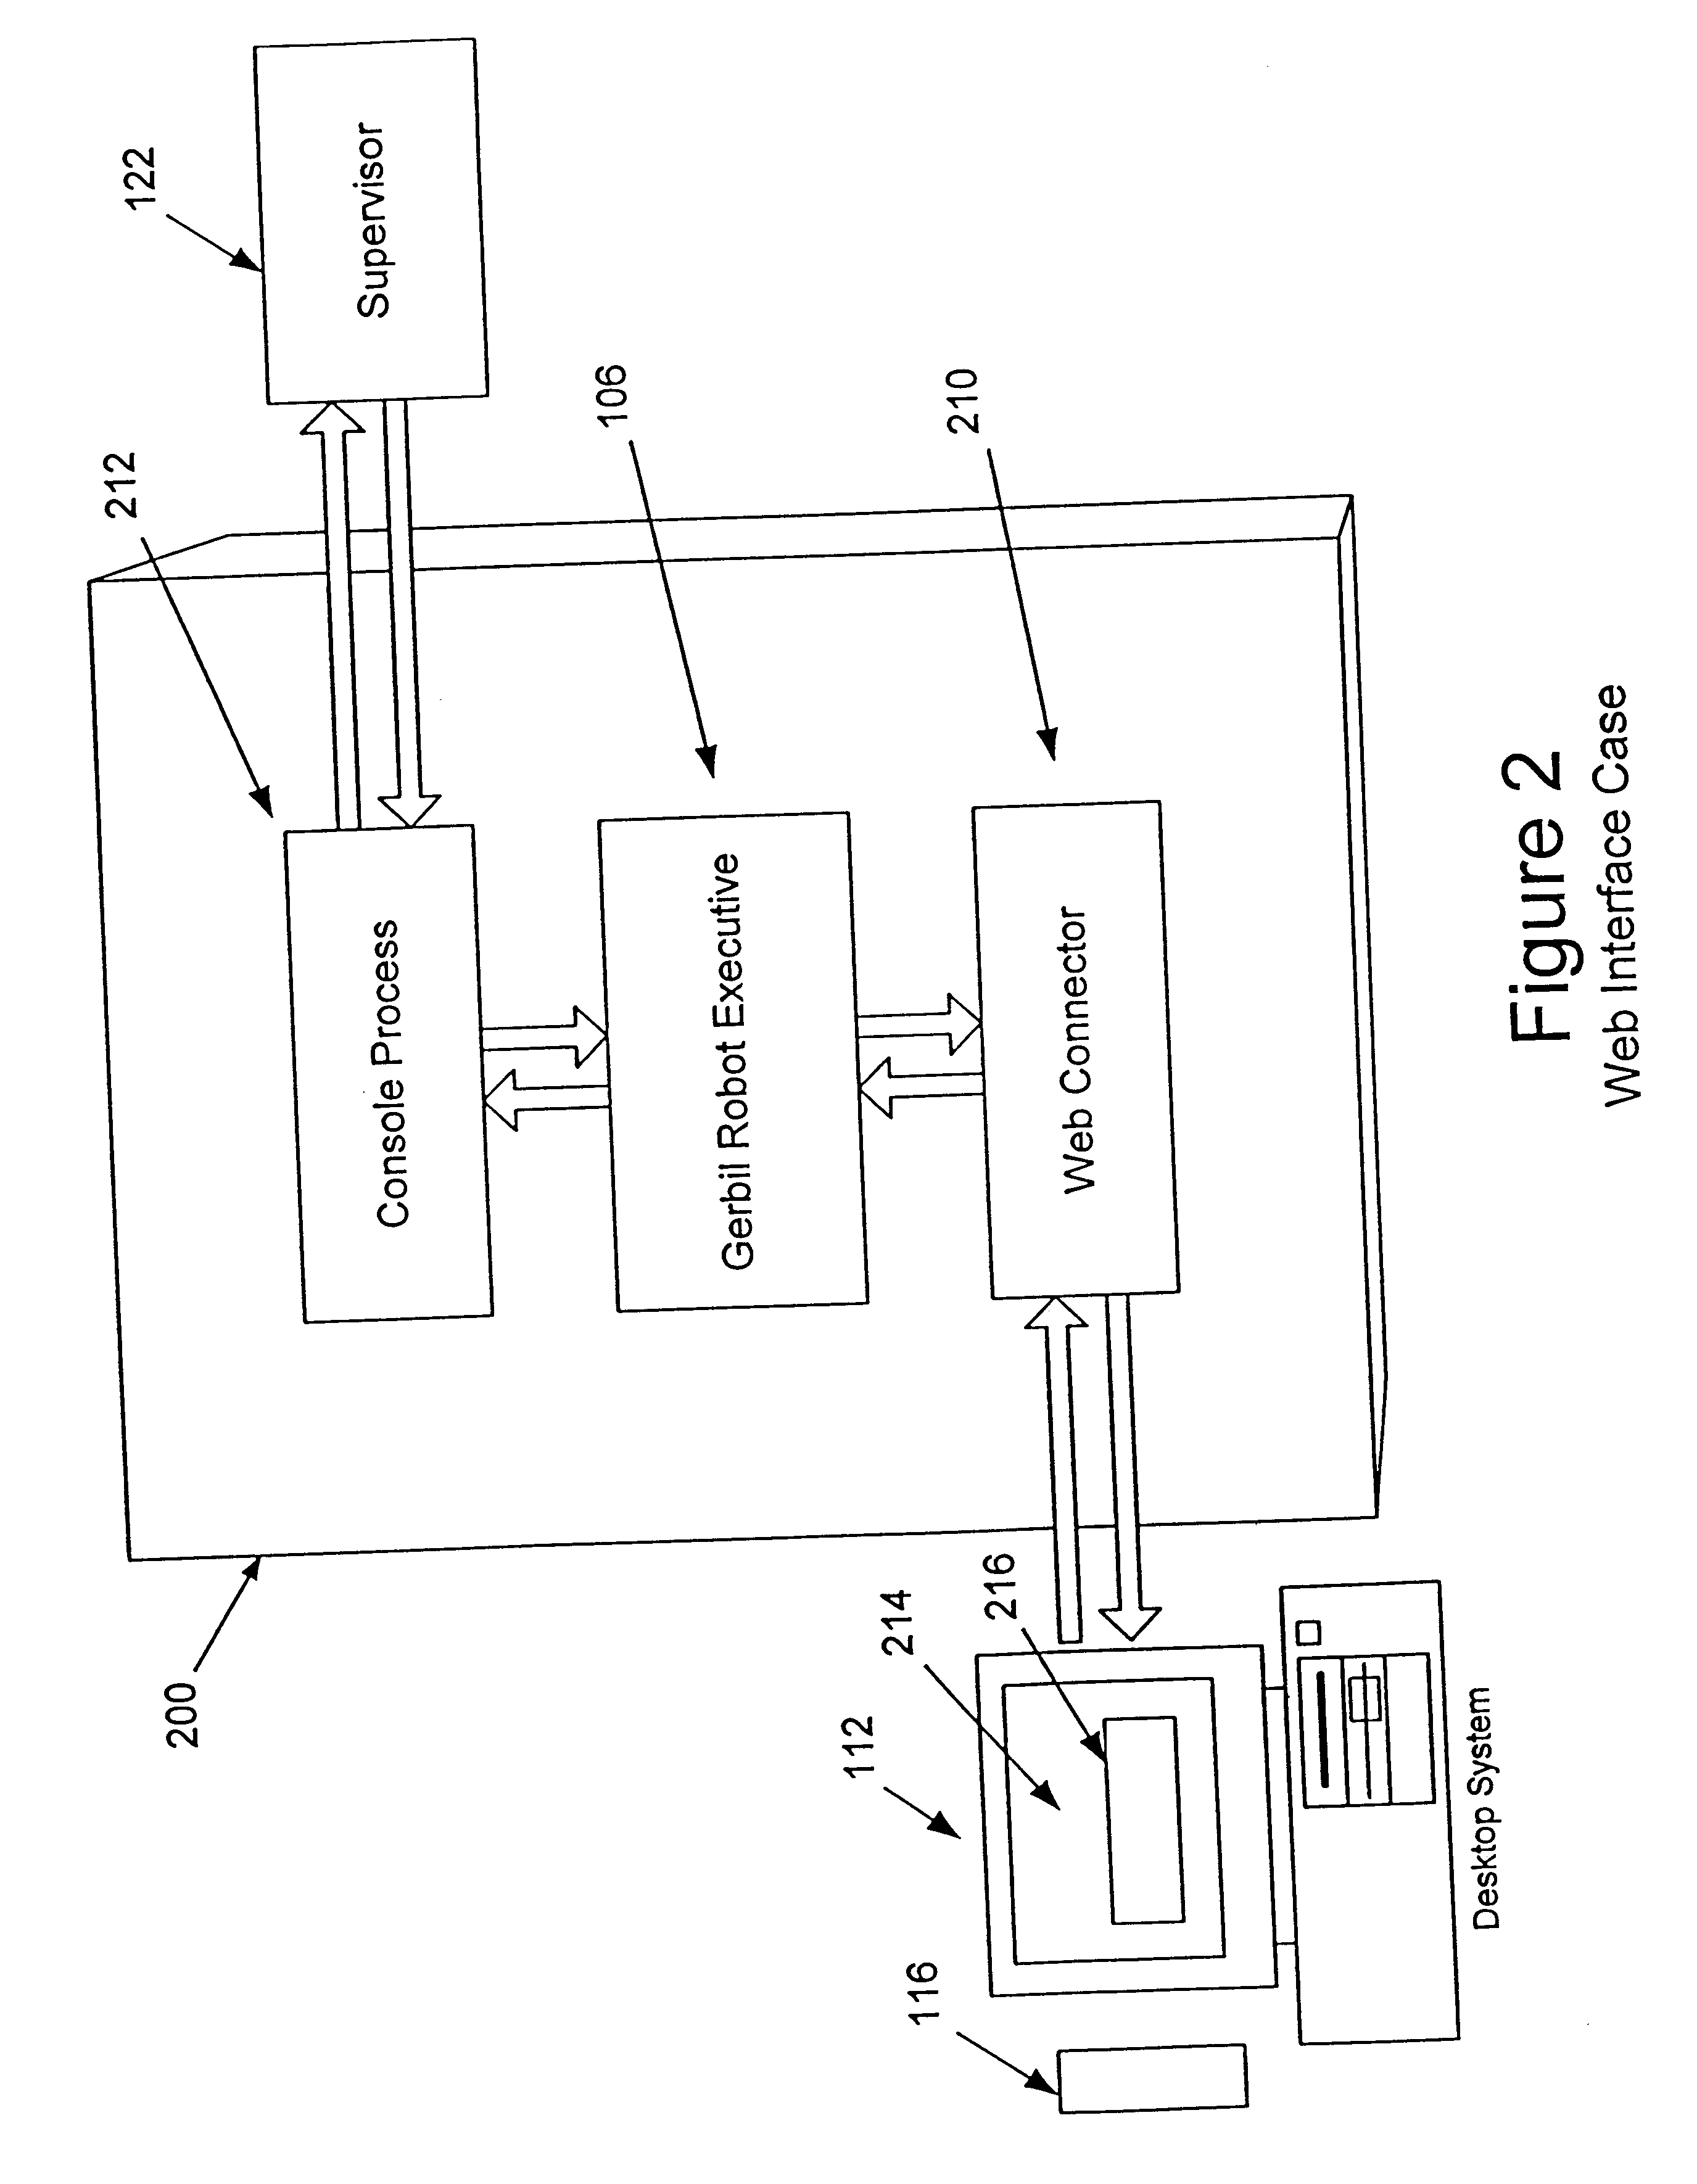 System and method for automatically focusing the attention of a virtual robot interacting with users